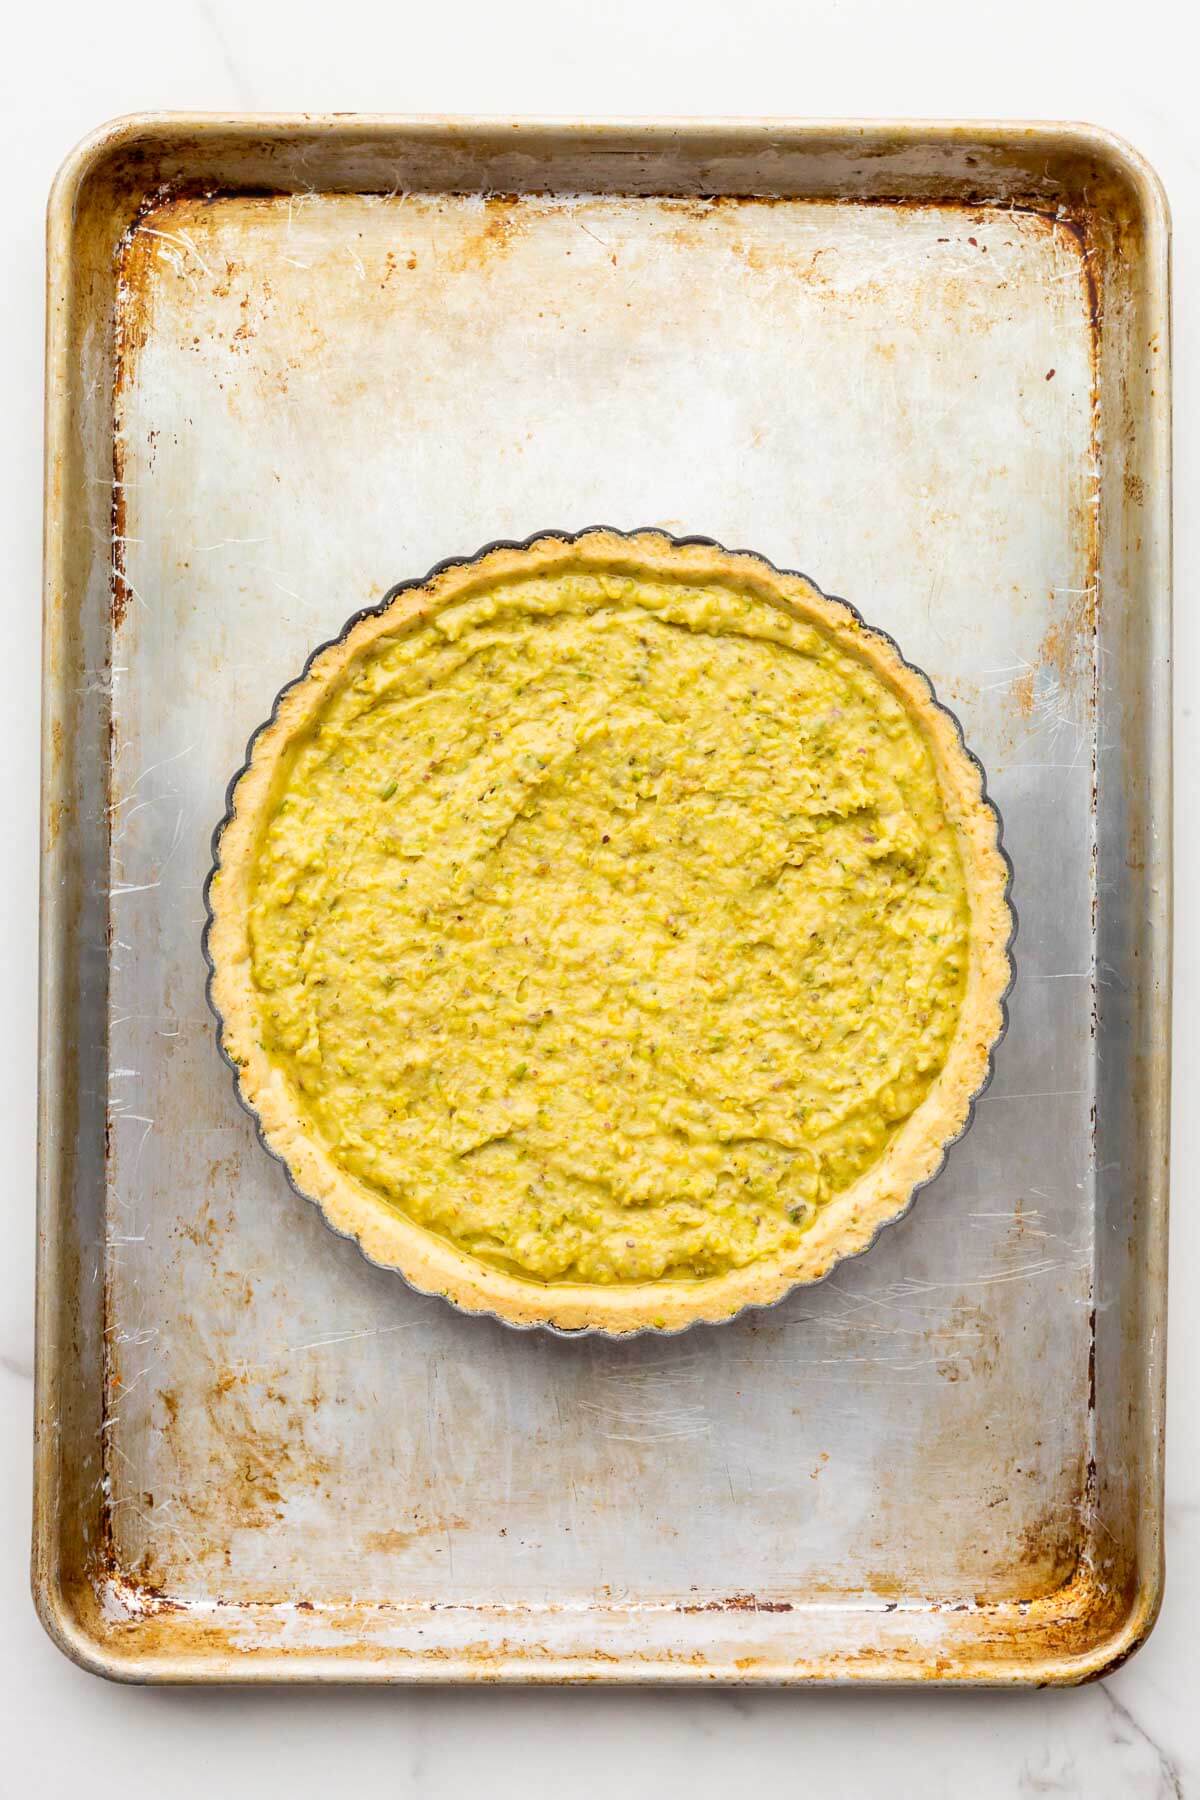 Unbaked pistachio tart in a fluted tart shell on a sheet pan ready for the oven.